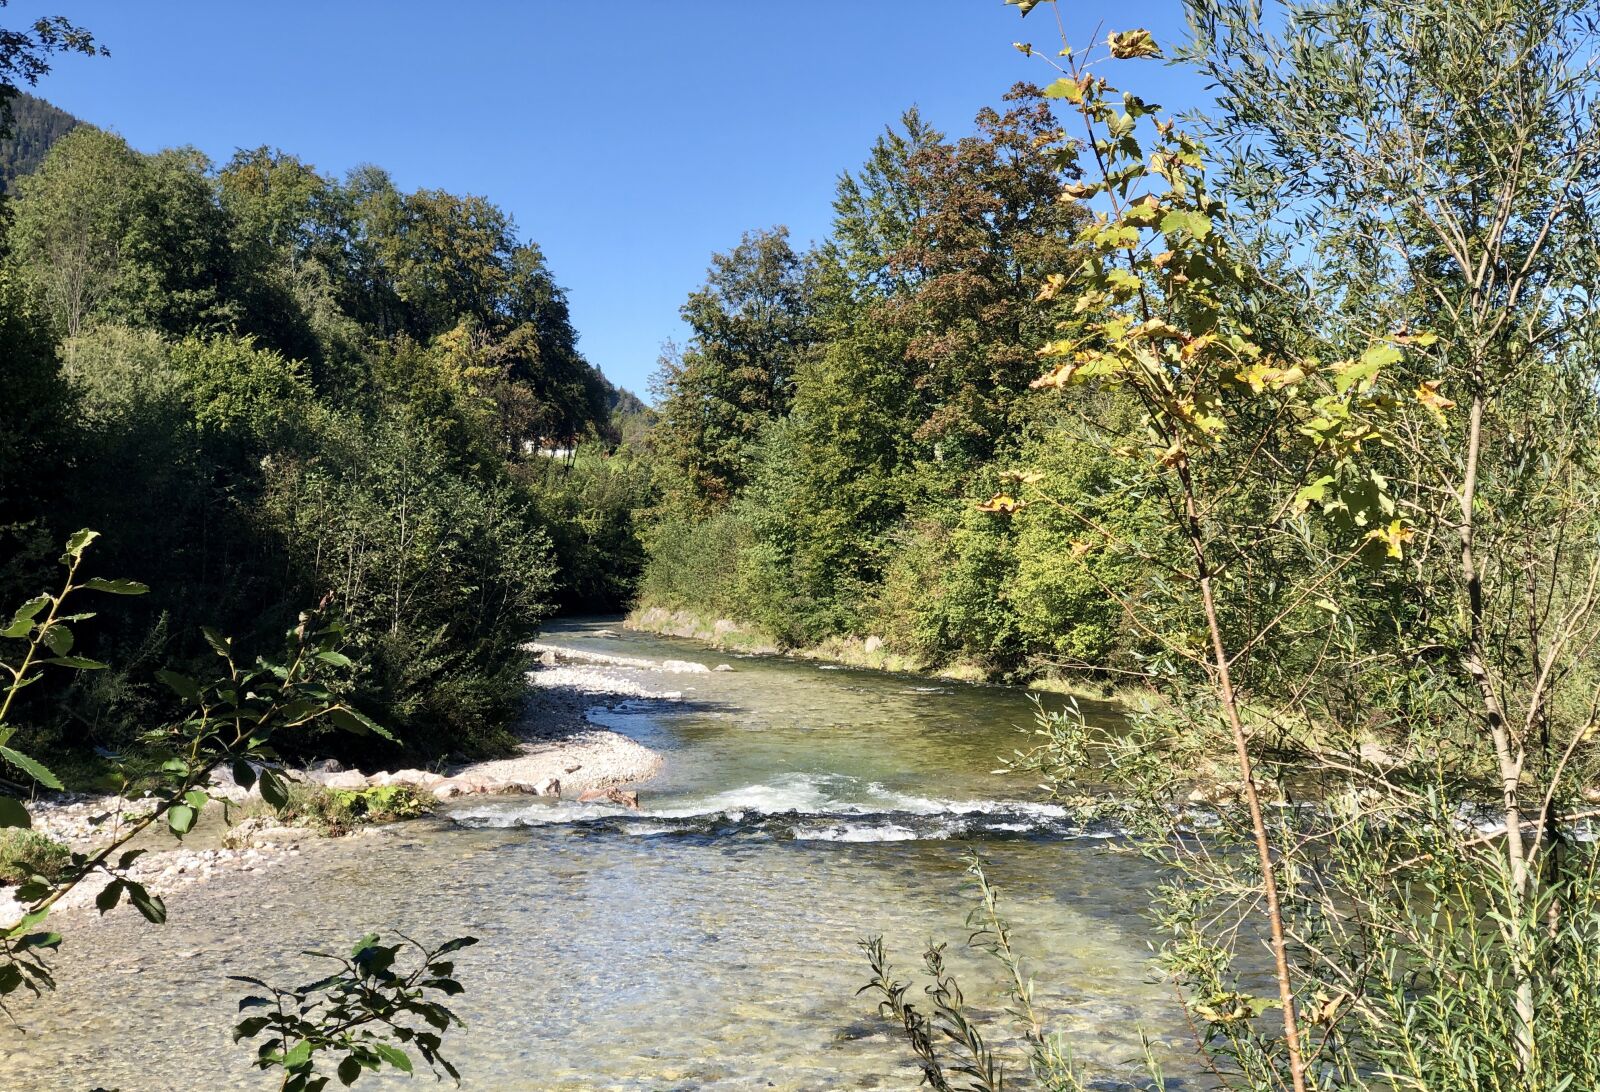 Apple iPhone X sample photo. River, bank, nature photography